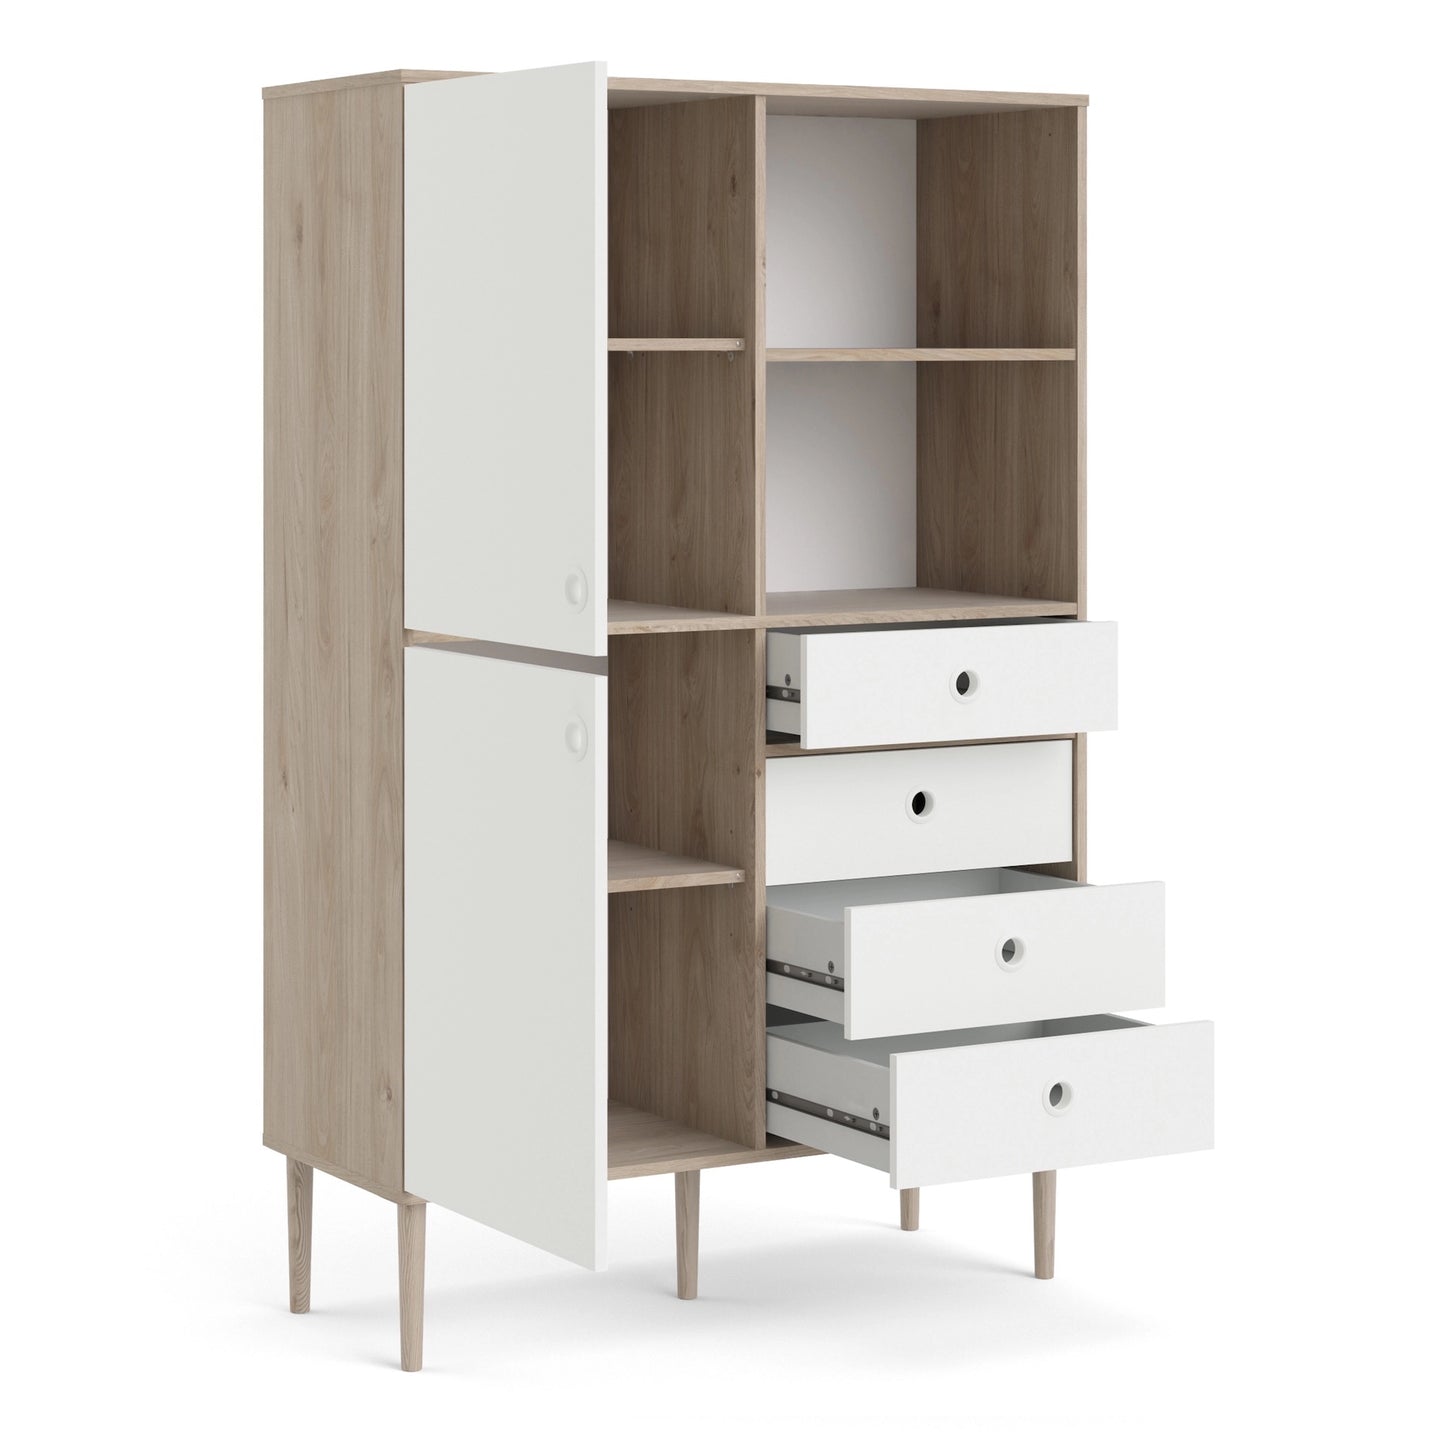 Furniture To Go Rome Bookcase 2 Doors + 4 Drawers in Jackson Hickory Oak with Matt White